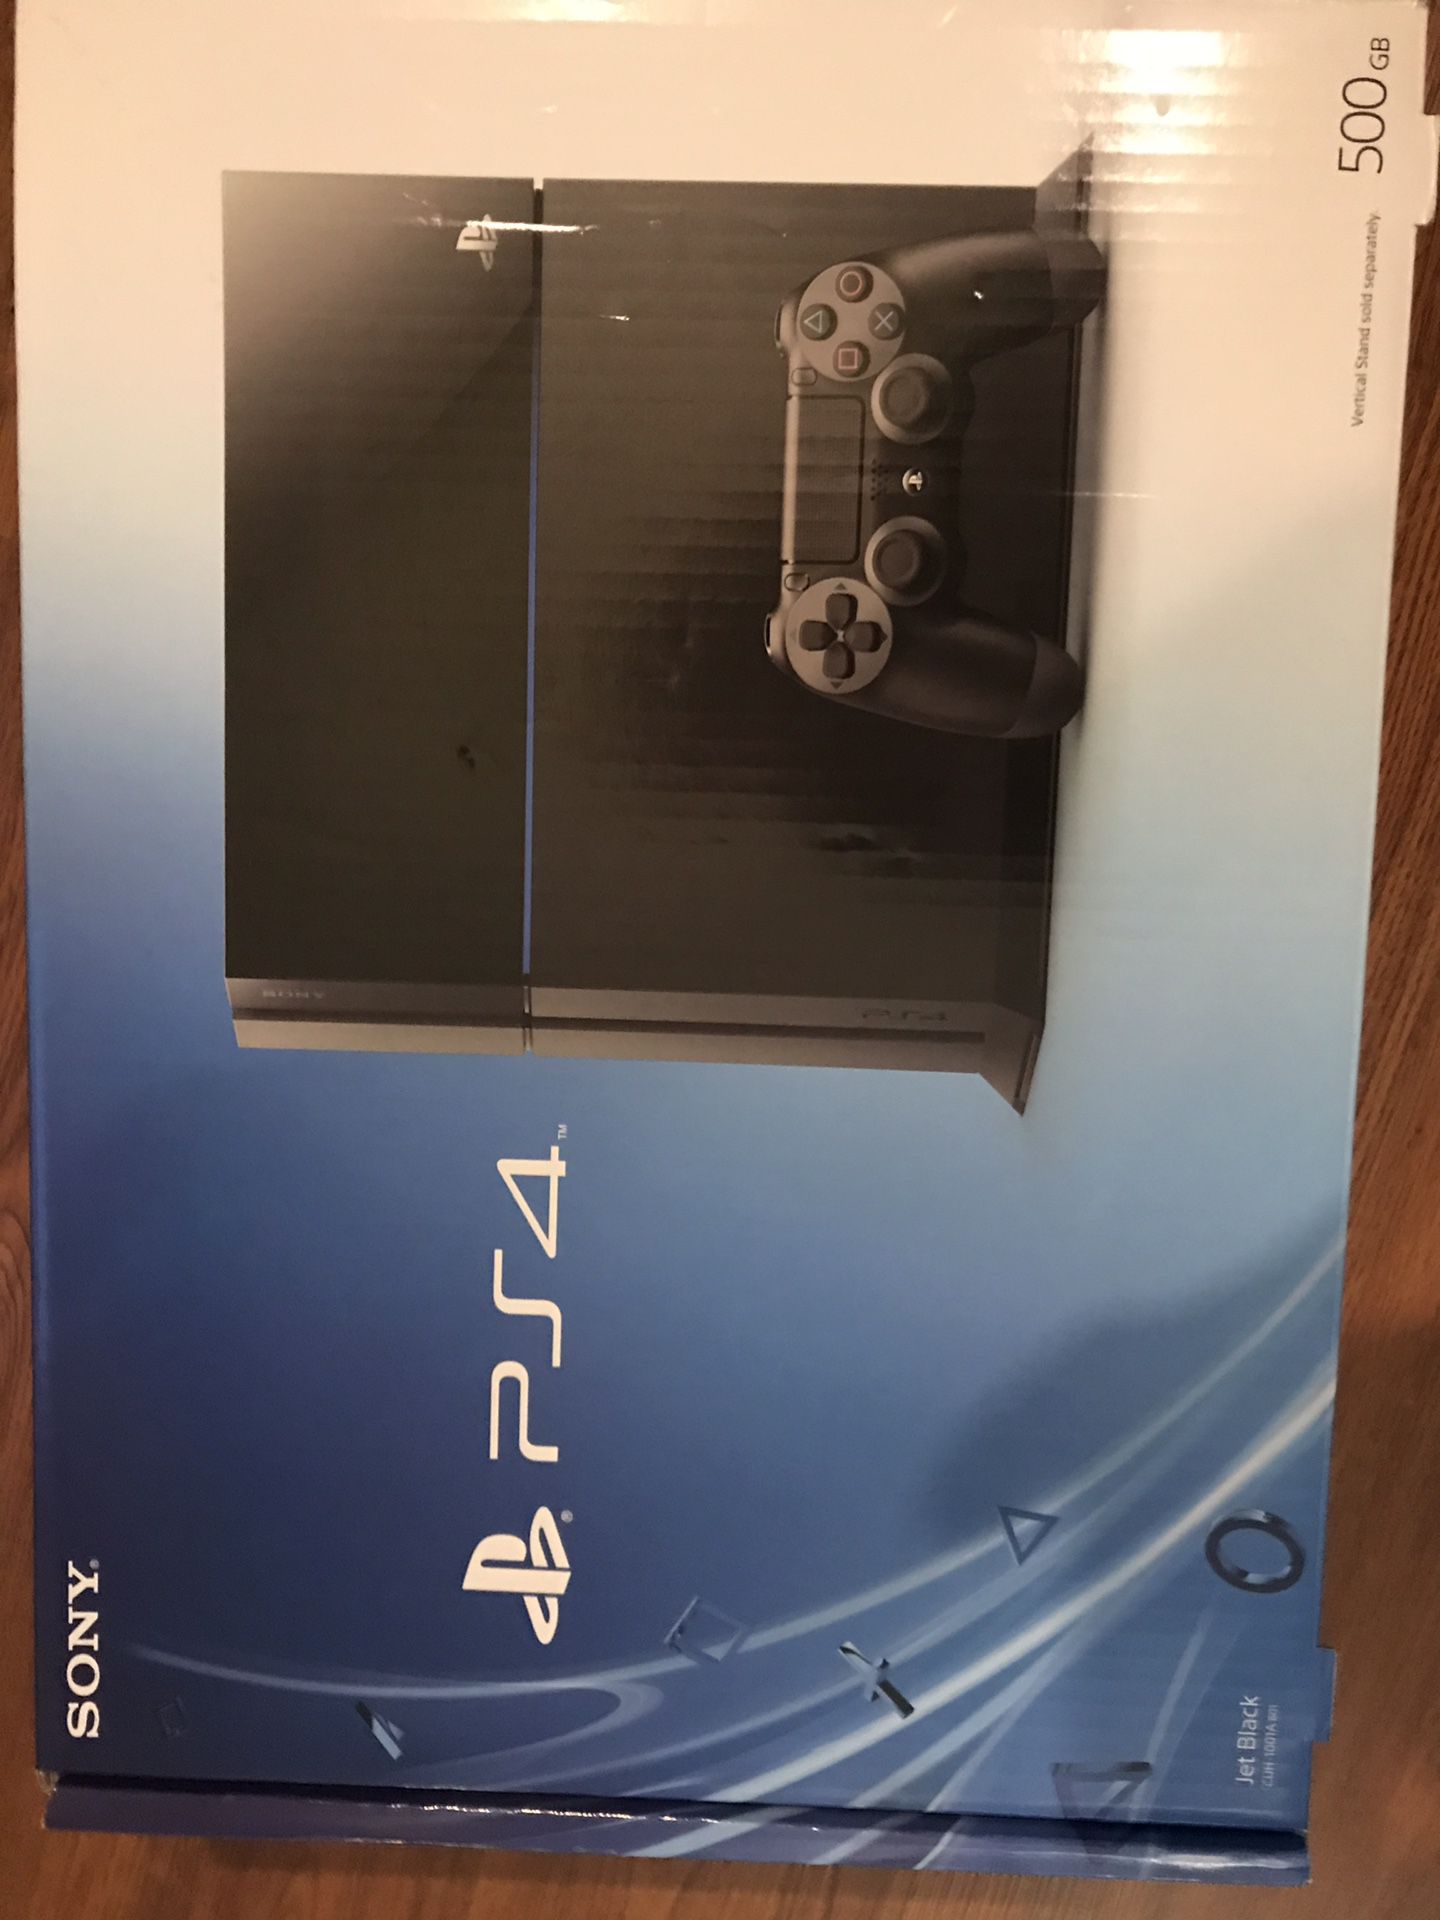 PS4: 500 GB with HDMI cable and 3 controllers